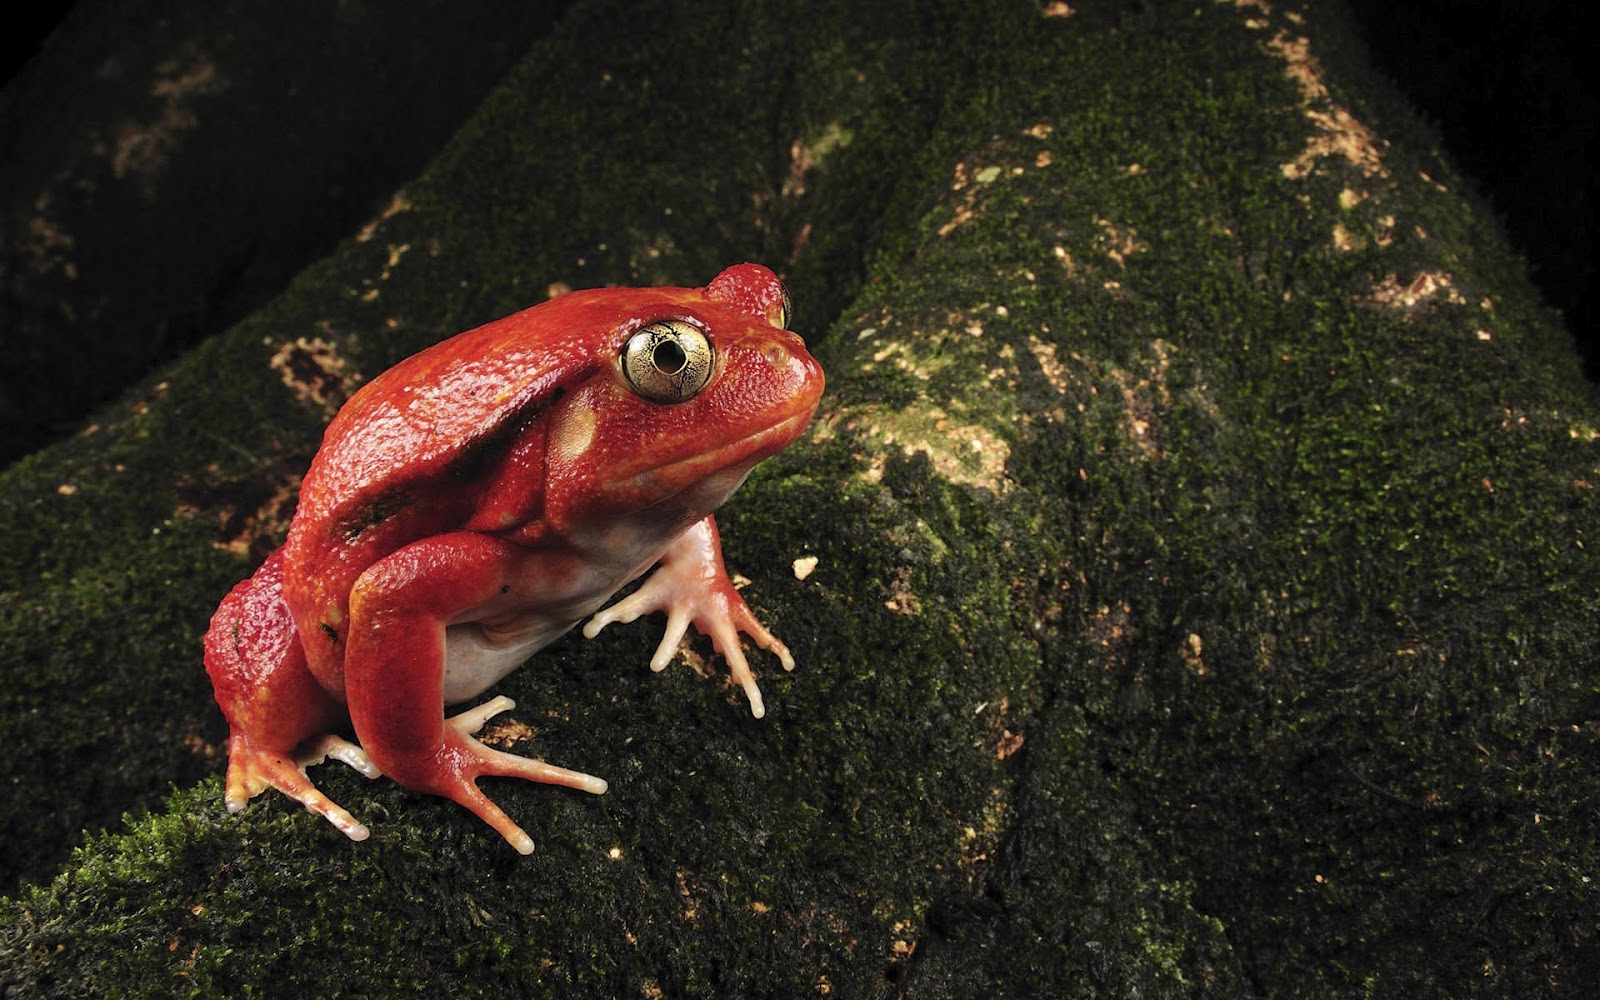 http://4.bp.blogspot.com/-vWcFkPQQ1Fc/UCQWfjYPBQI/AAAAAAAAANk/0tufed9bNBc/s1600/hd-frog-wallpaper-with-a-toxic-red-frog-background-picture.jpg